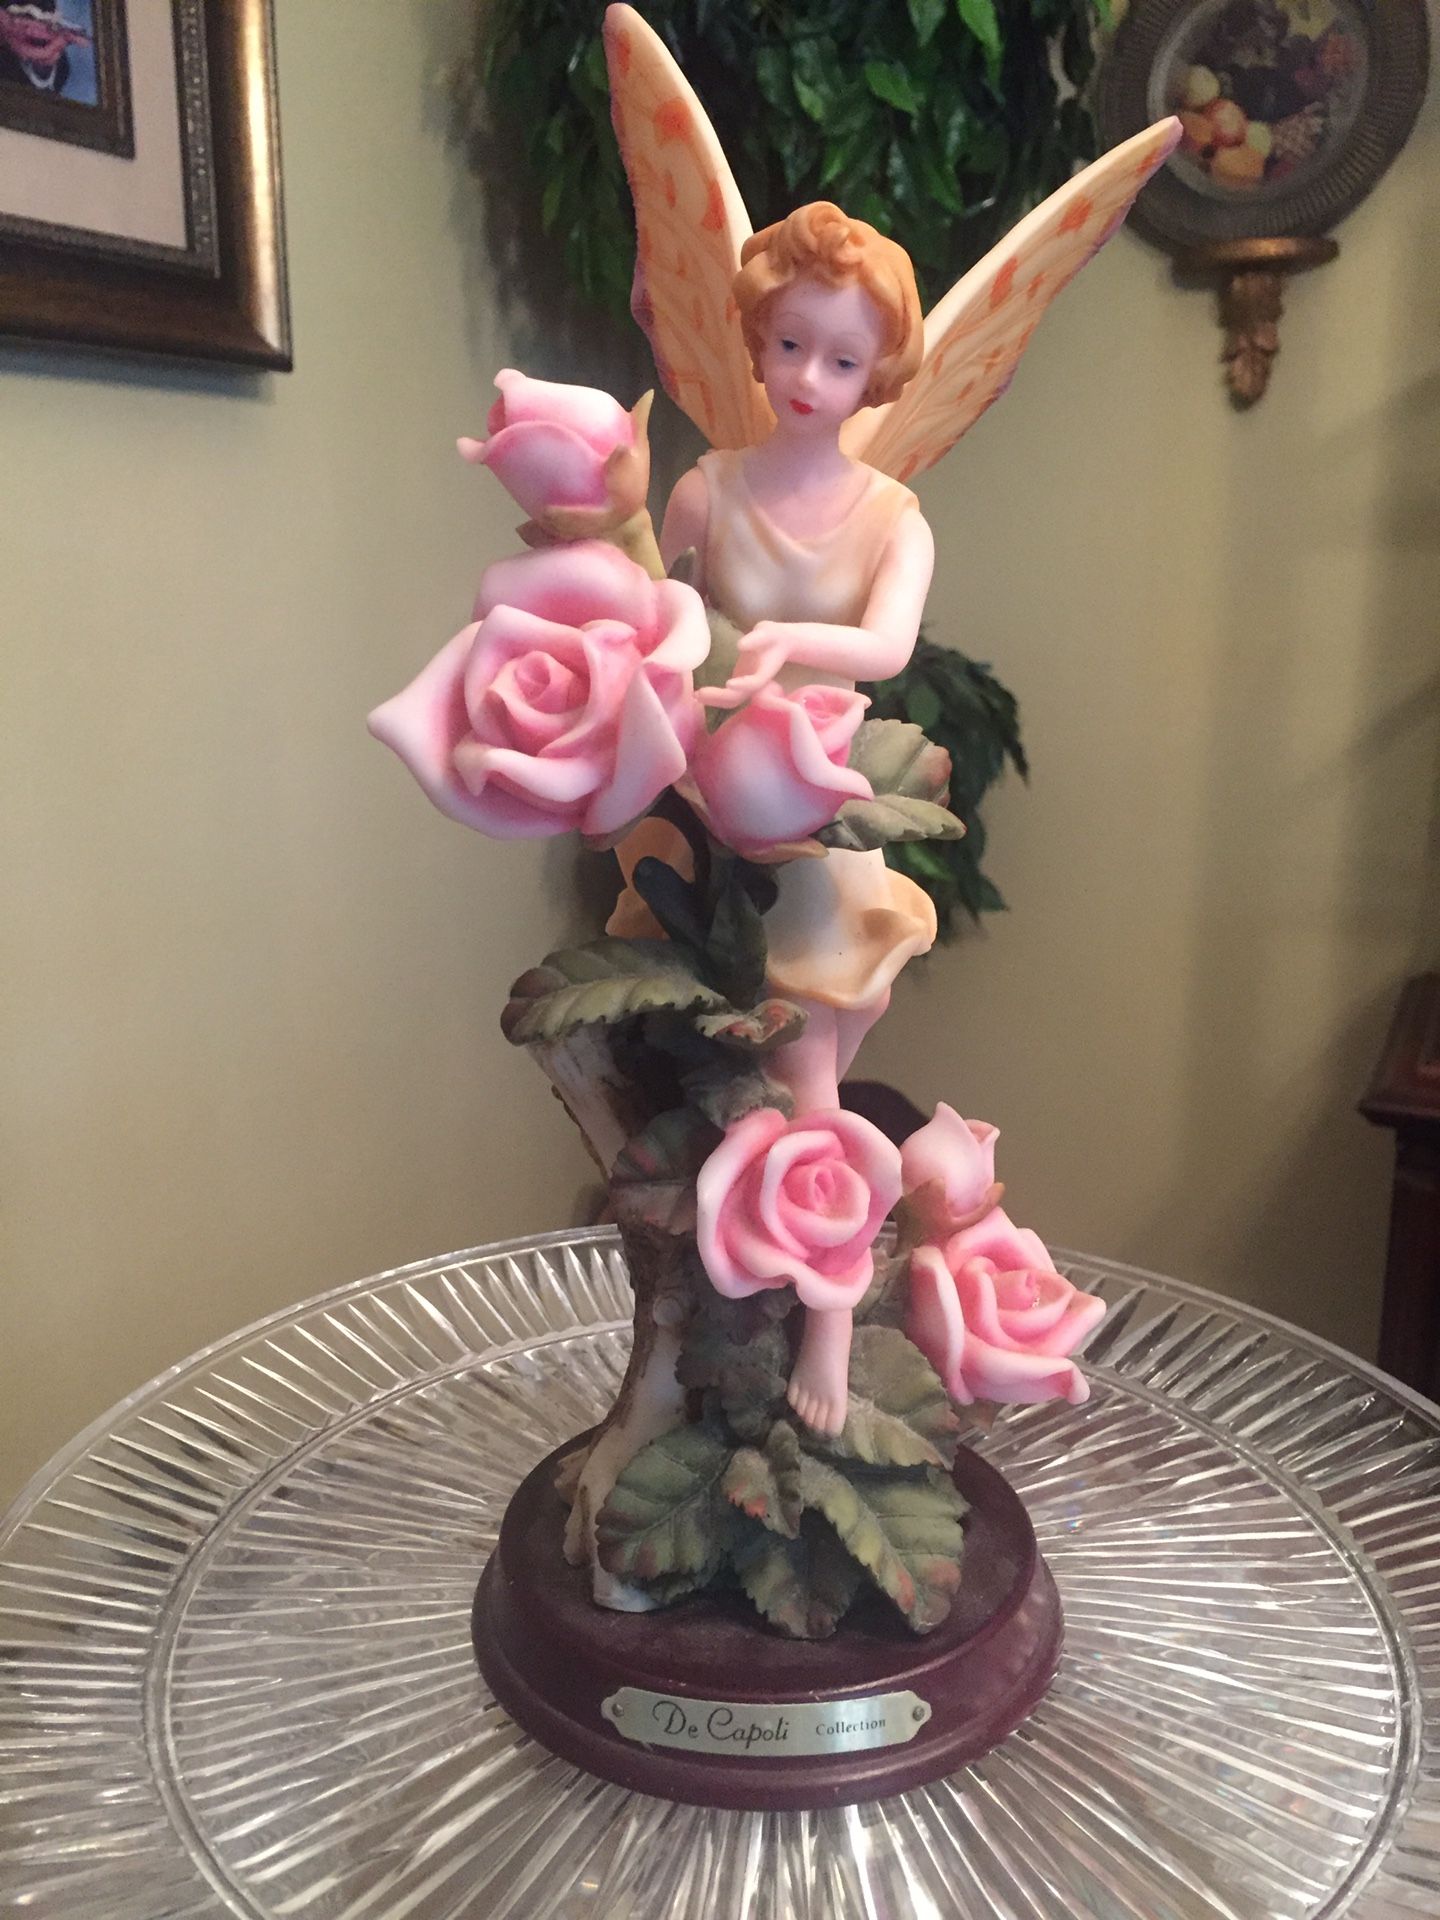 De Capoli Collection Fairy with Roses Statue. 13” tall!